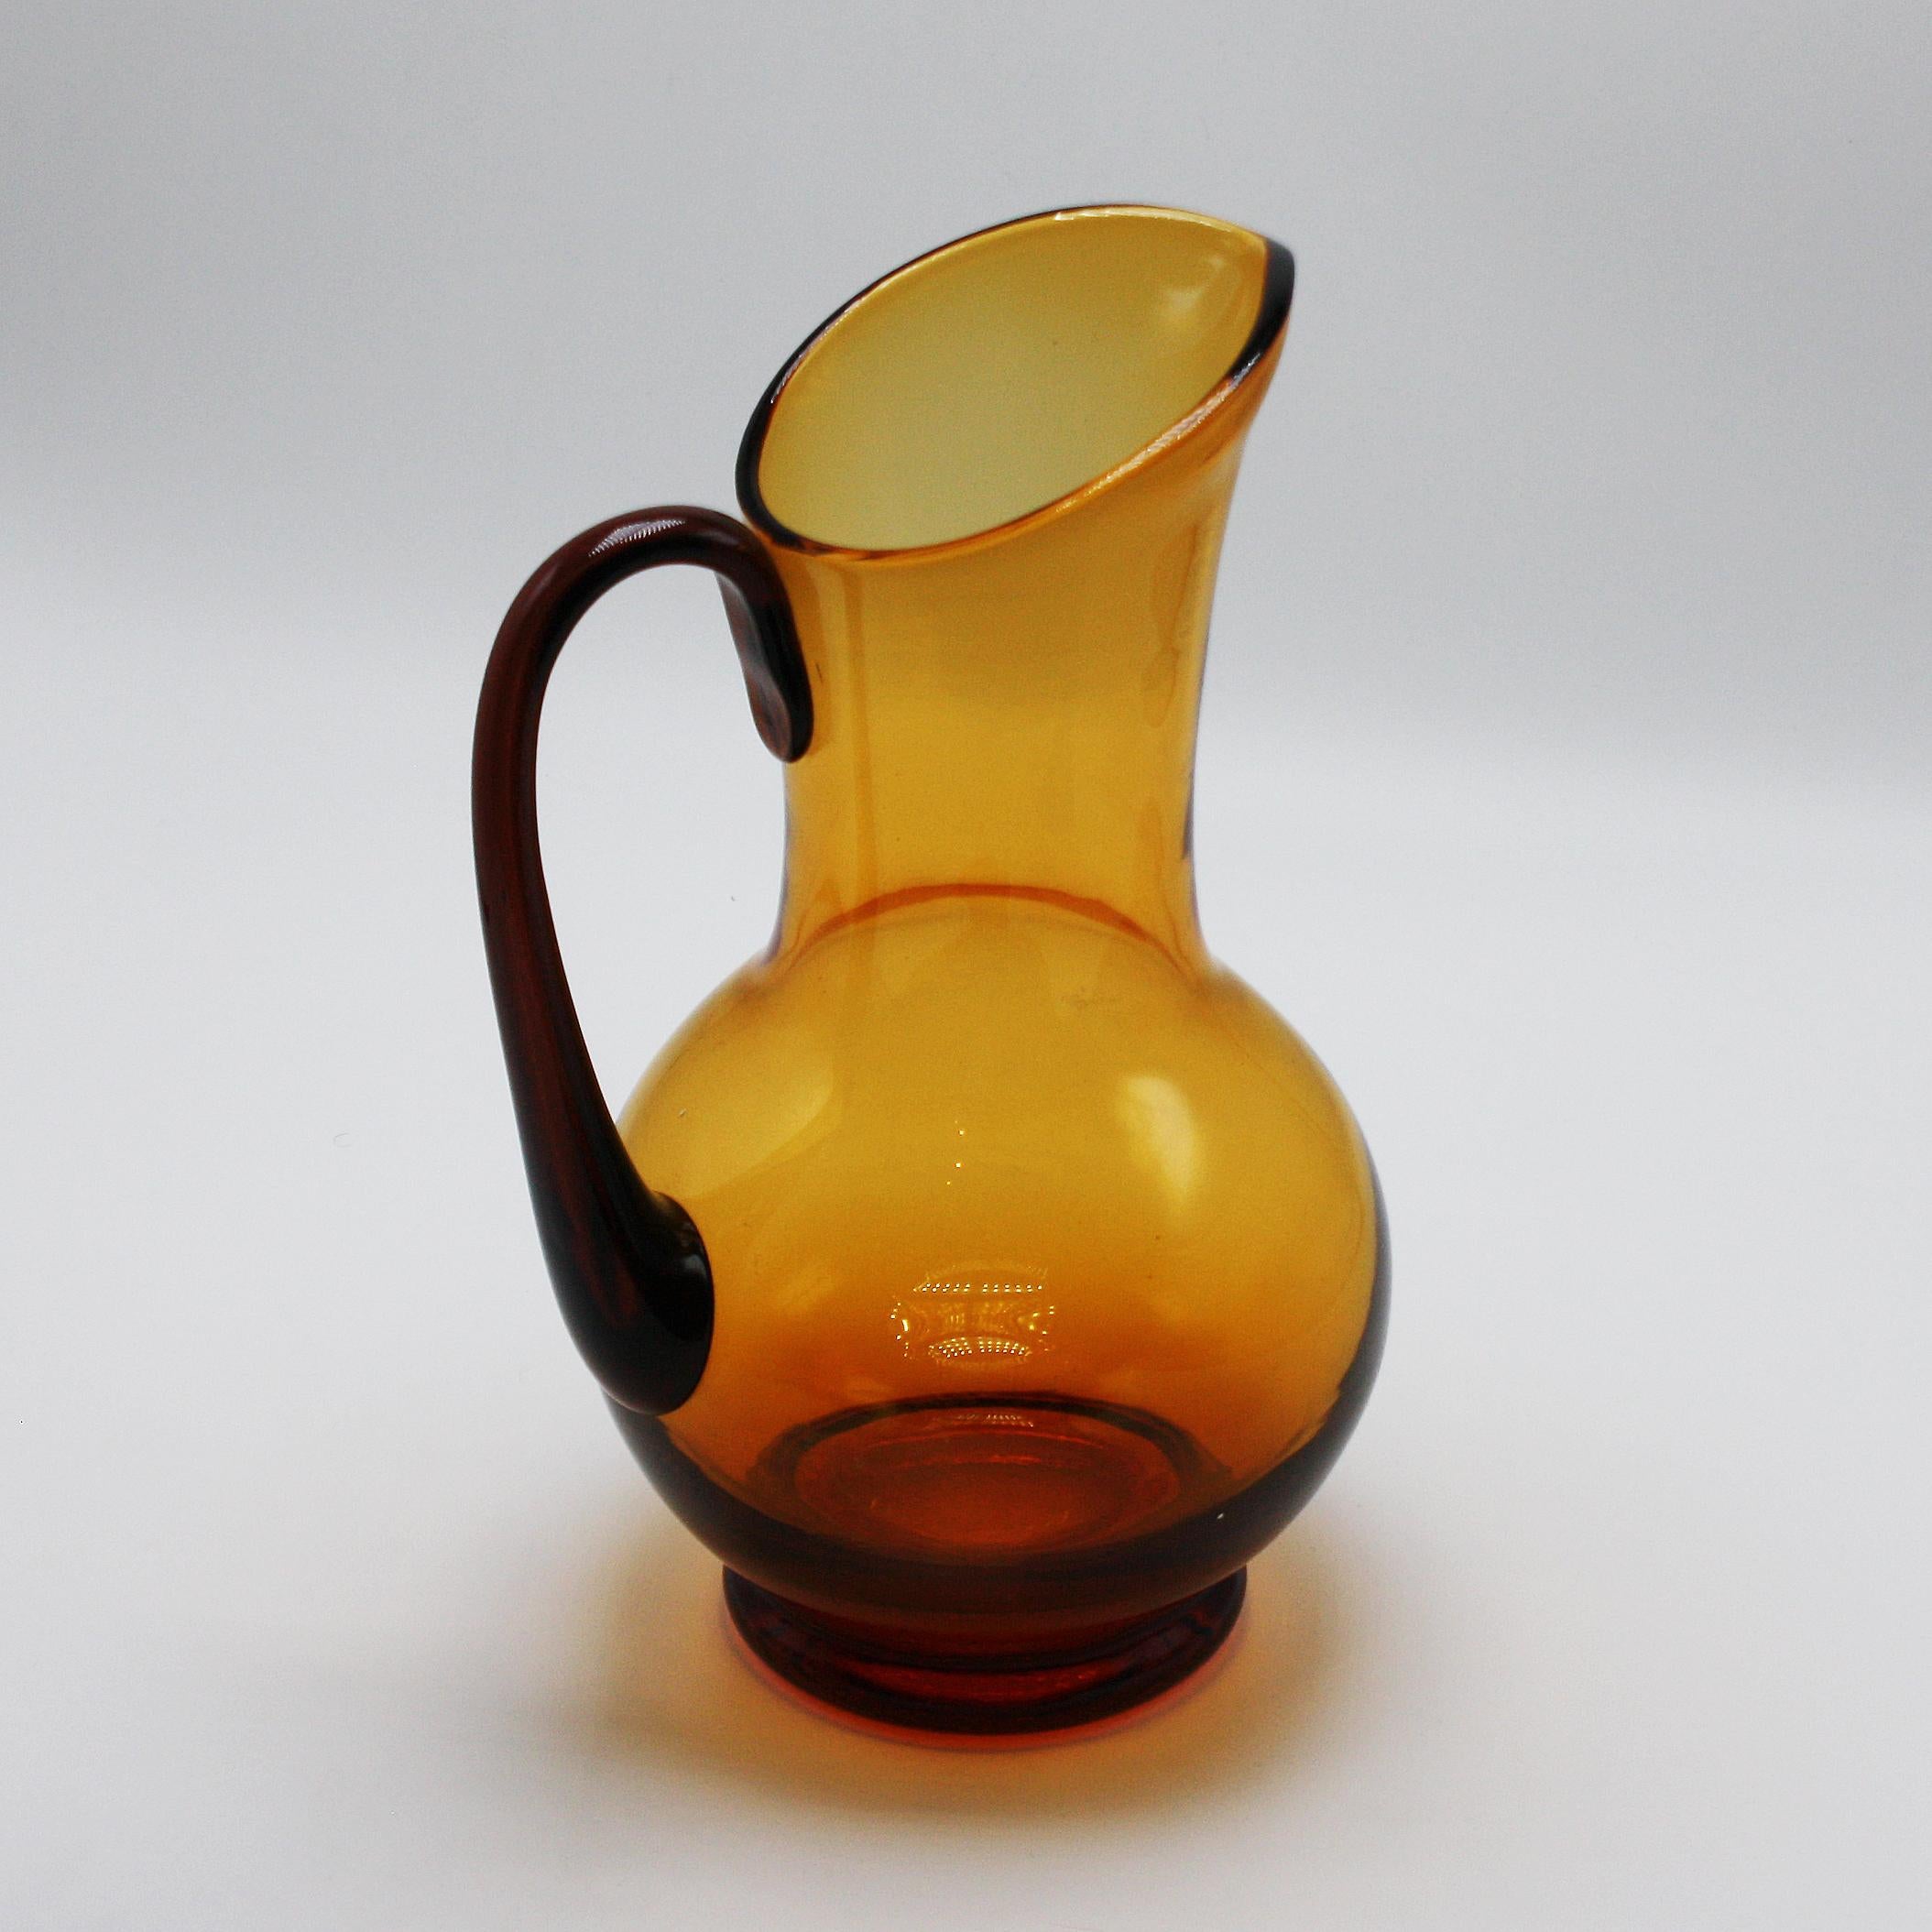 Amber Murano glass pitcher with amethyst handle, circa 1940.
$525.